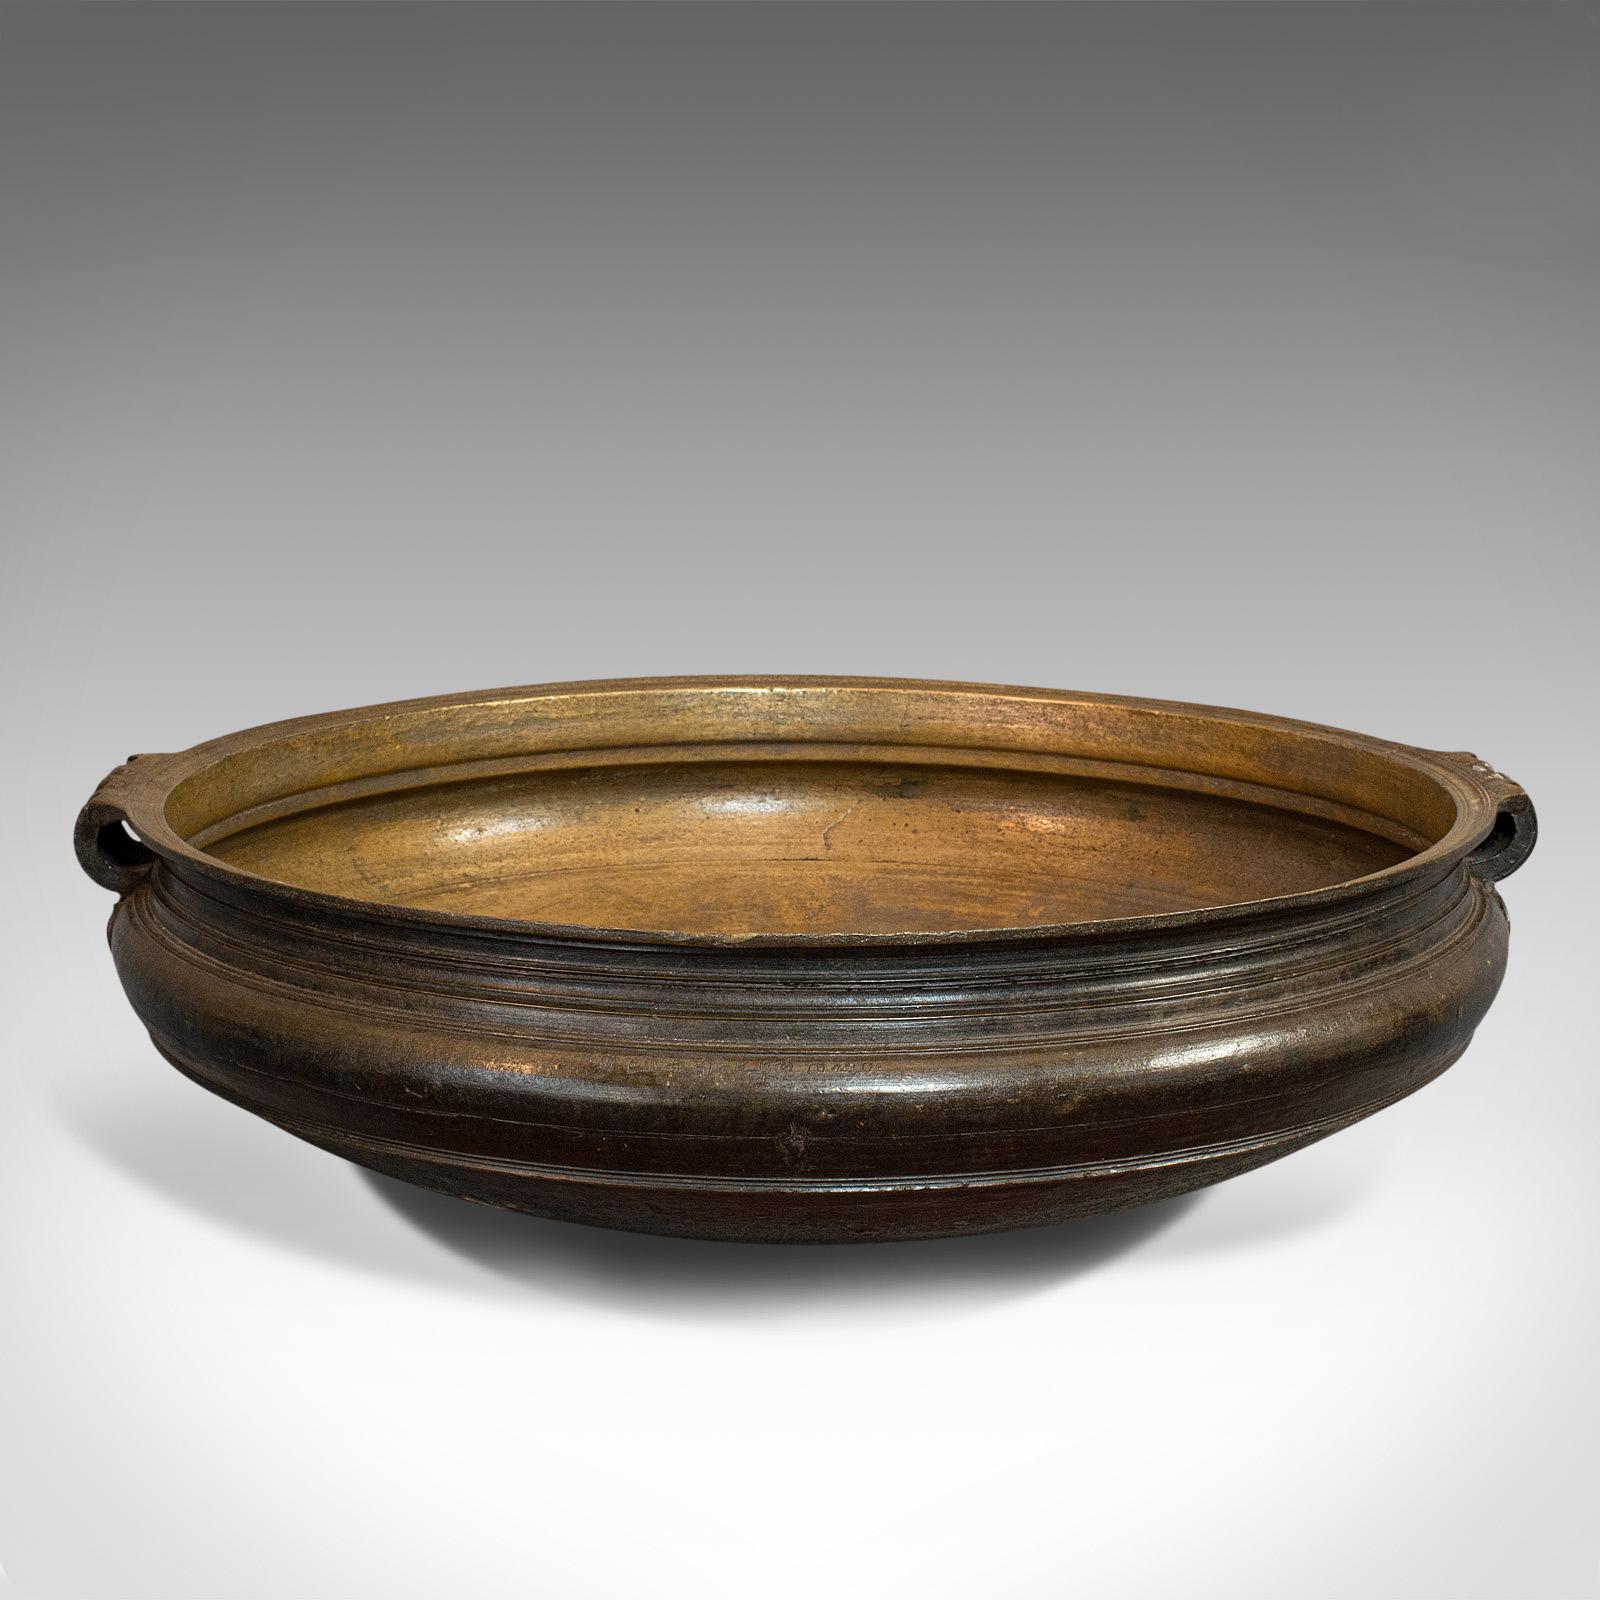 This is an antique Victorian urli. An Indian, bronze temple or cooking bowl, dating to the mid-19th century, circa 1850.

Wonderful example of 19th century Indian cookware
Displays a desirable aged patina
Heavy bronze form with deep, tapered